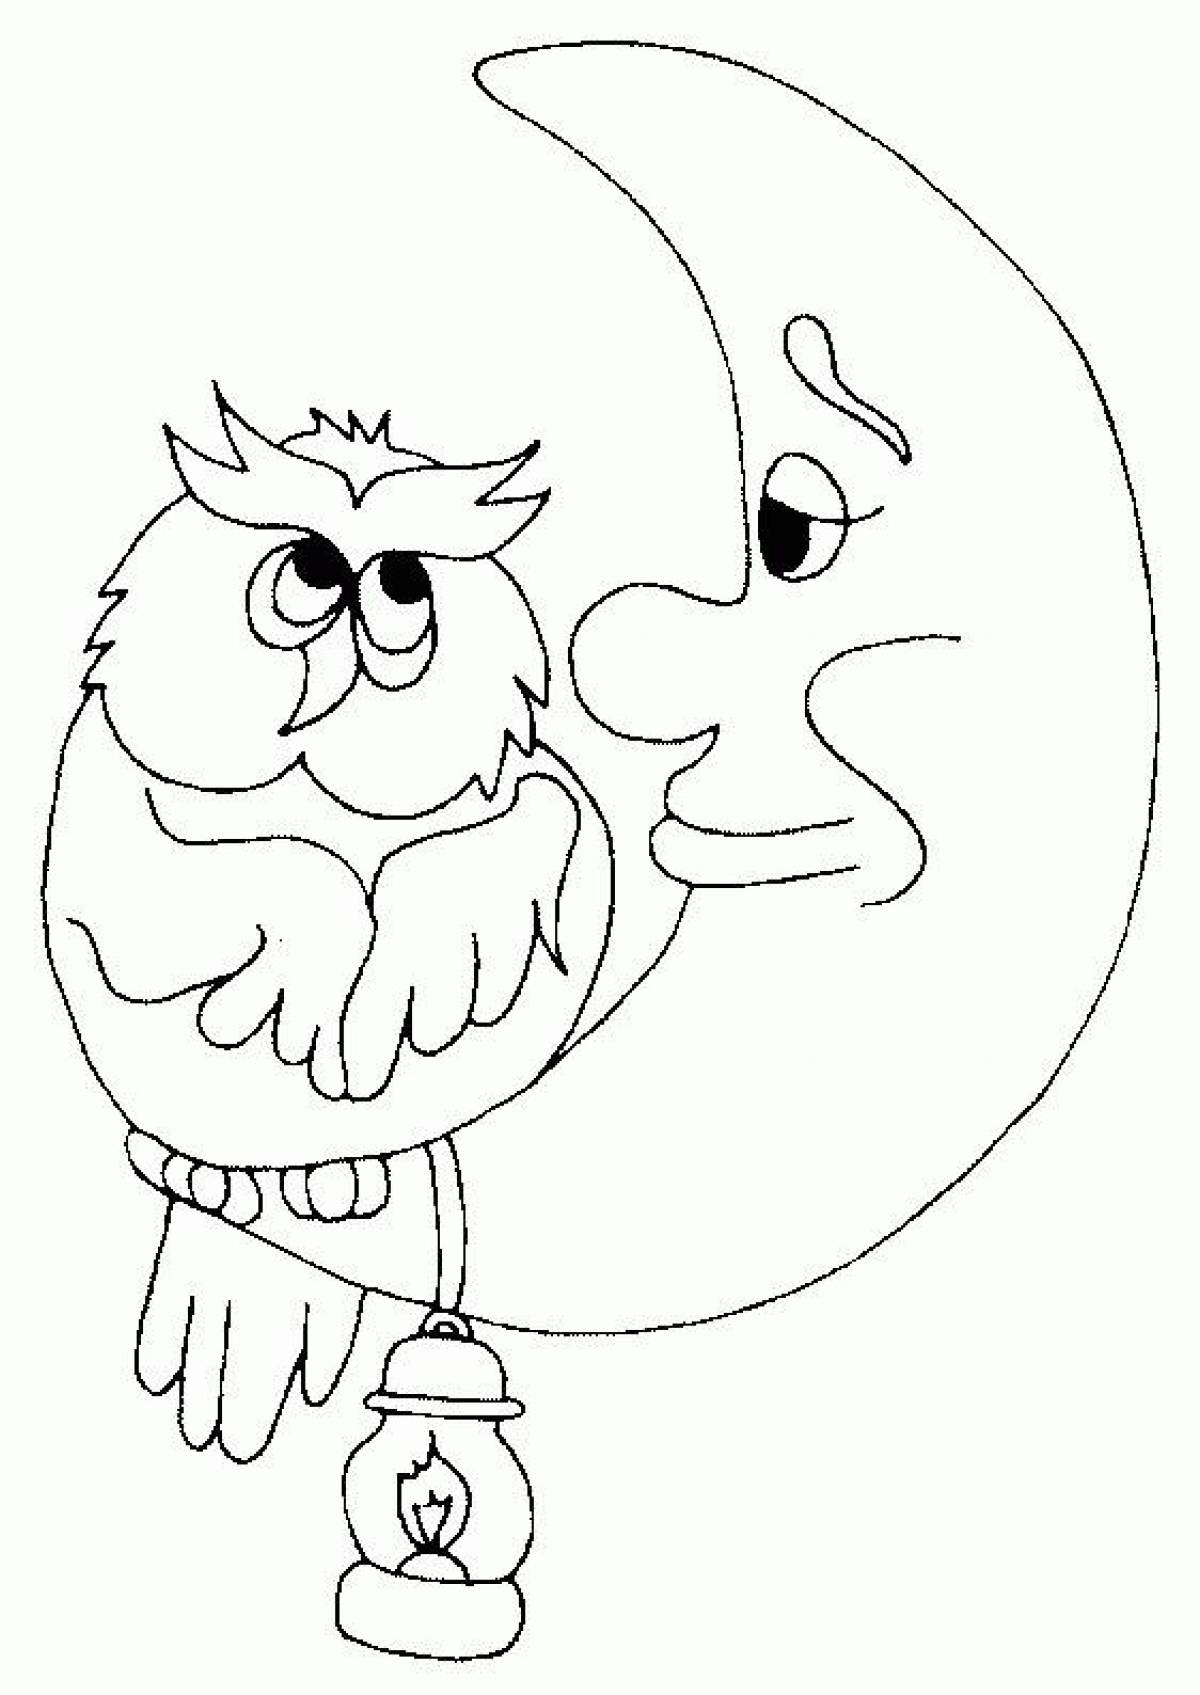 Moon and owl